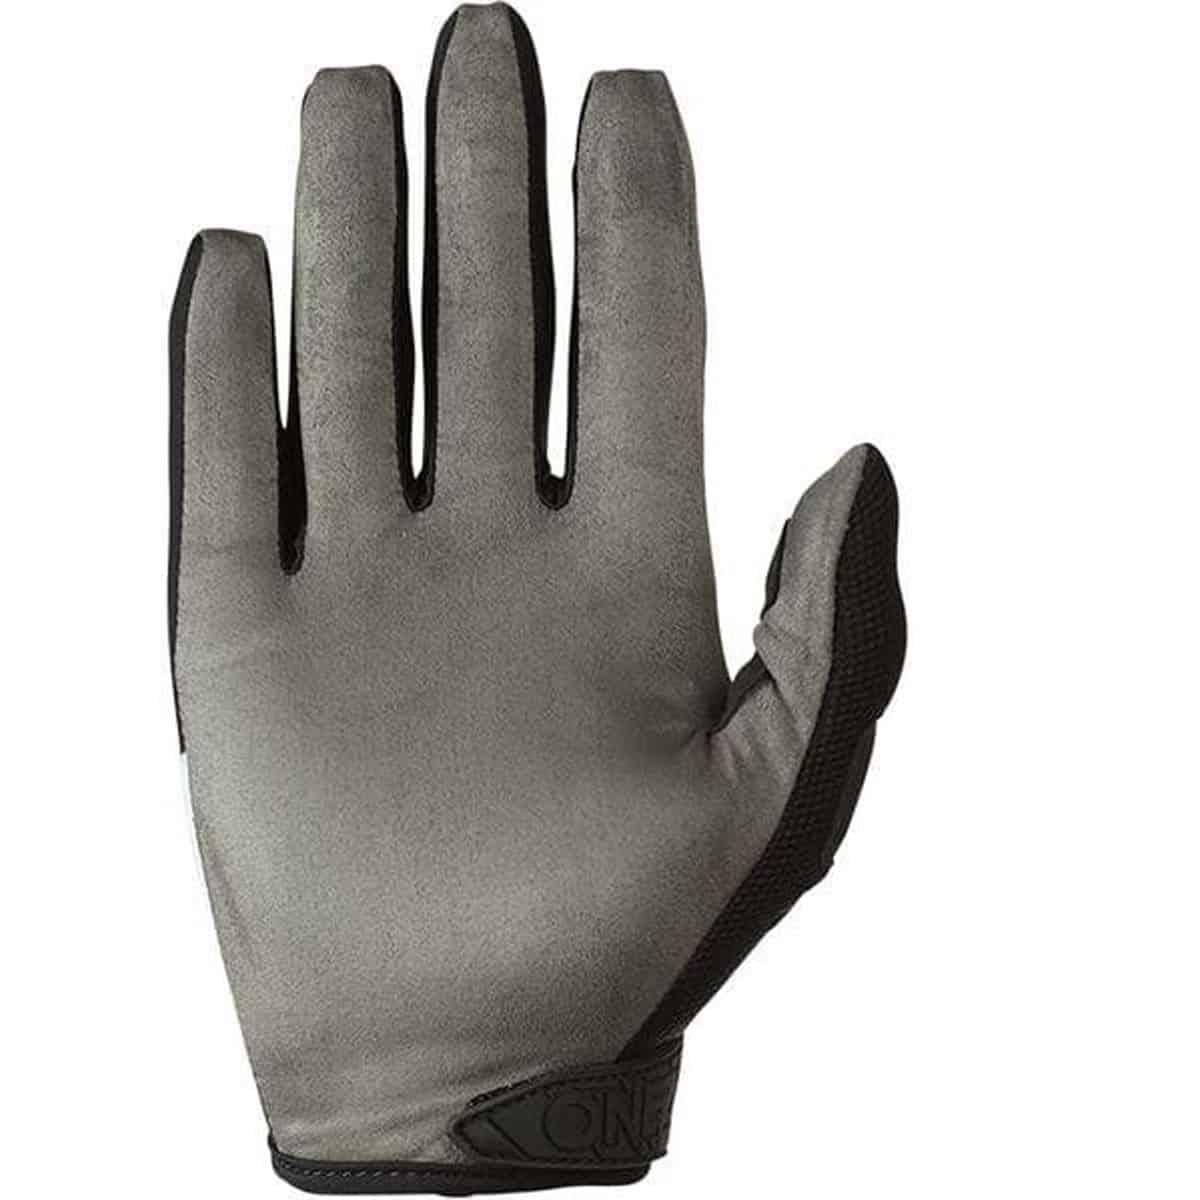 Performance riding gloves for off-road.-2